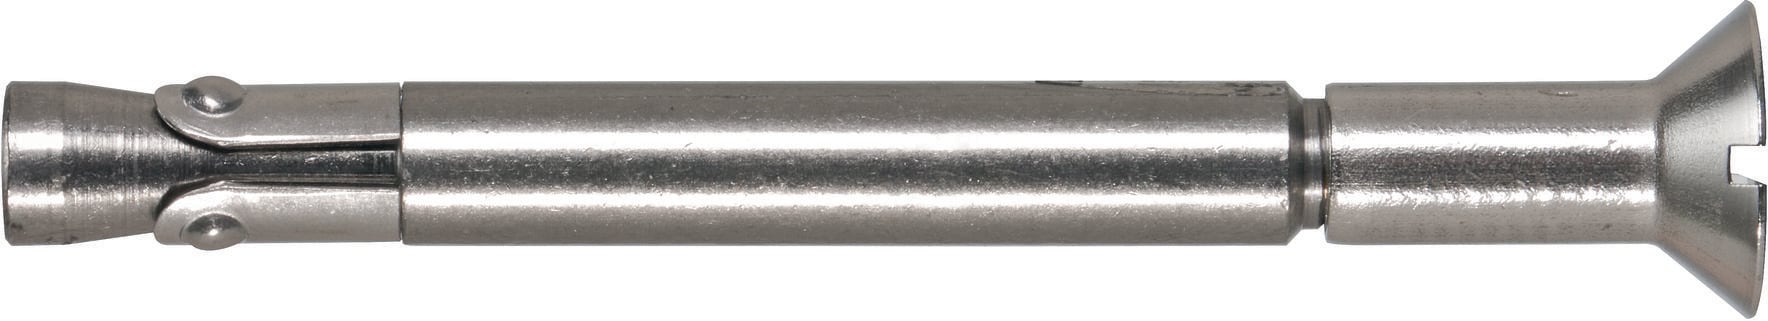 3/8 x 3-3/4 Pack of 50 Hilti 282555 KWIK Bolt 3 Expansion Anchor 304 Stainless Steel 